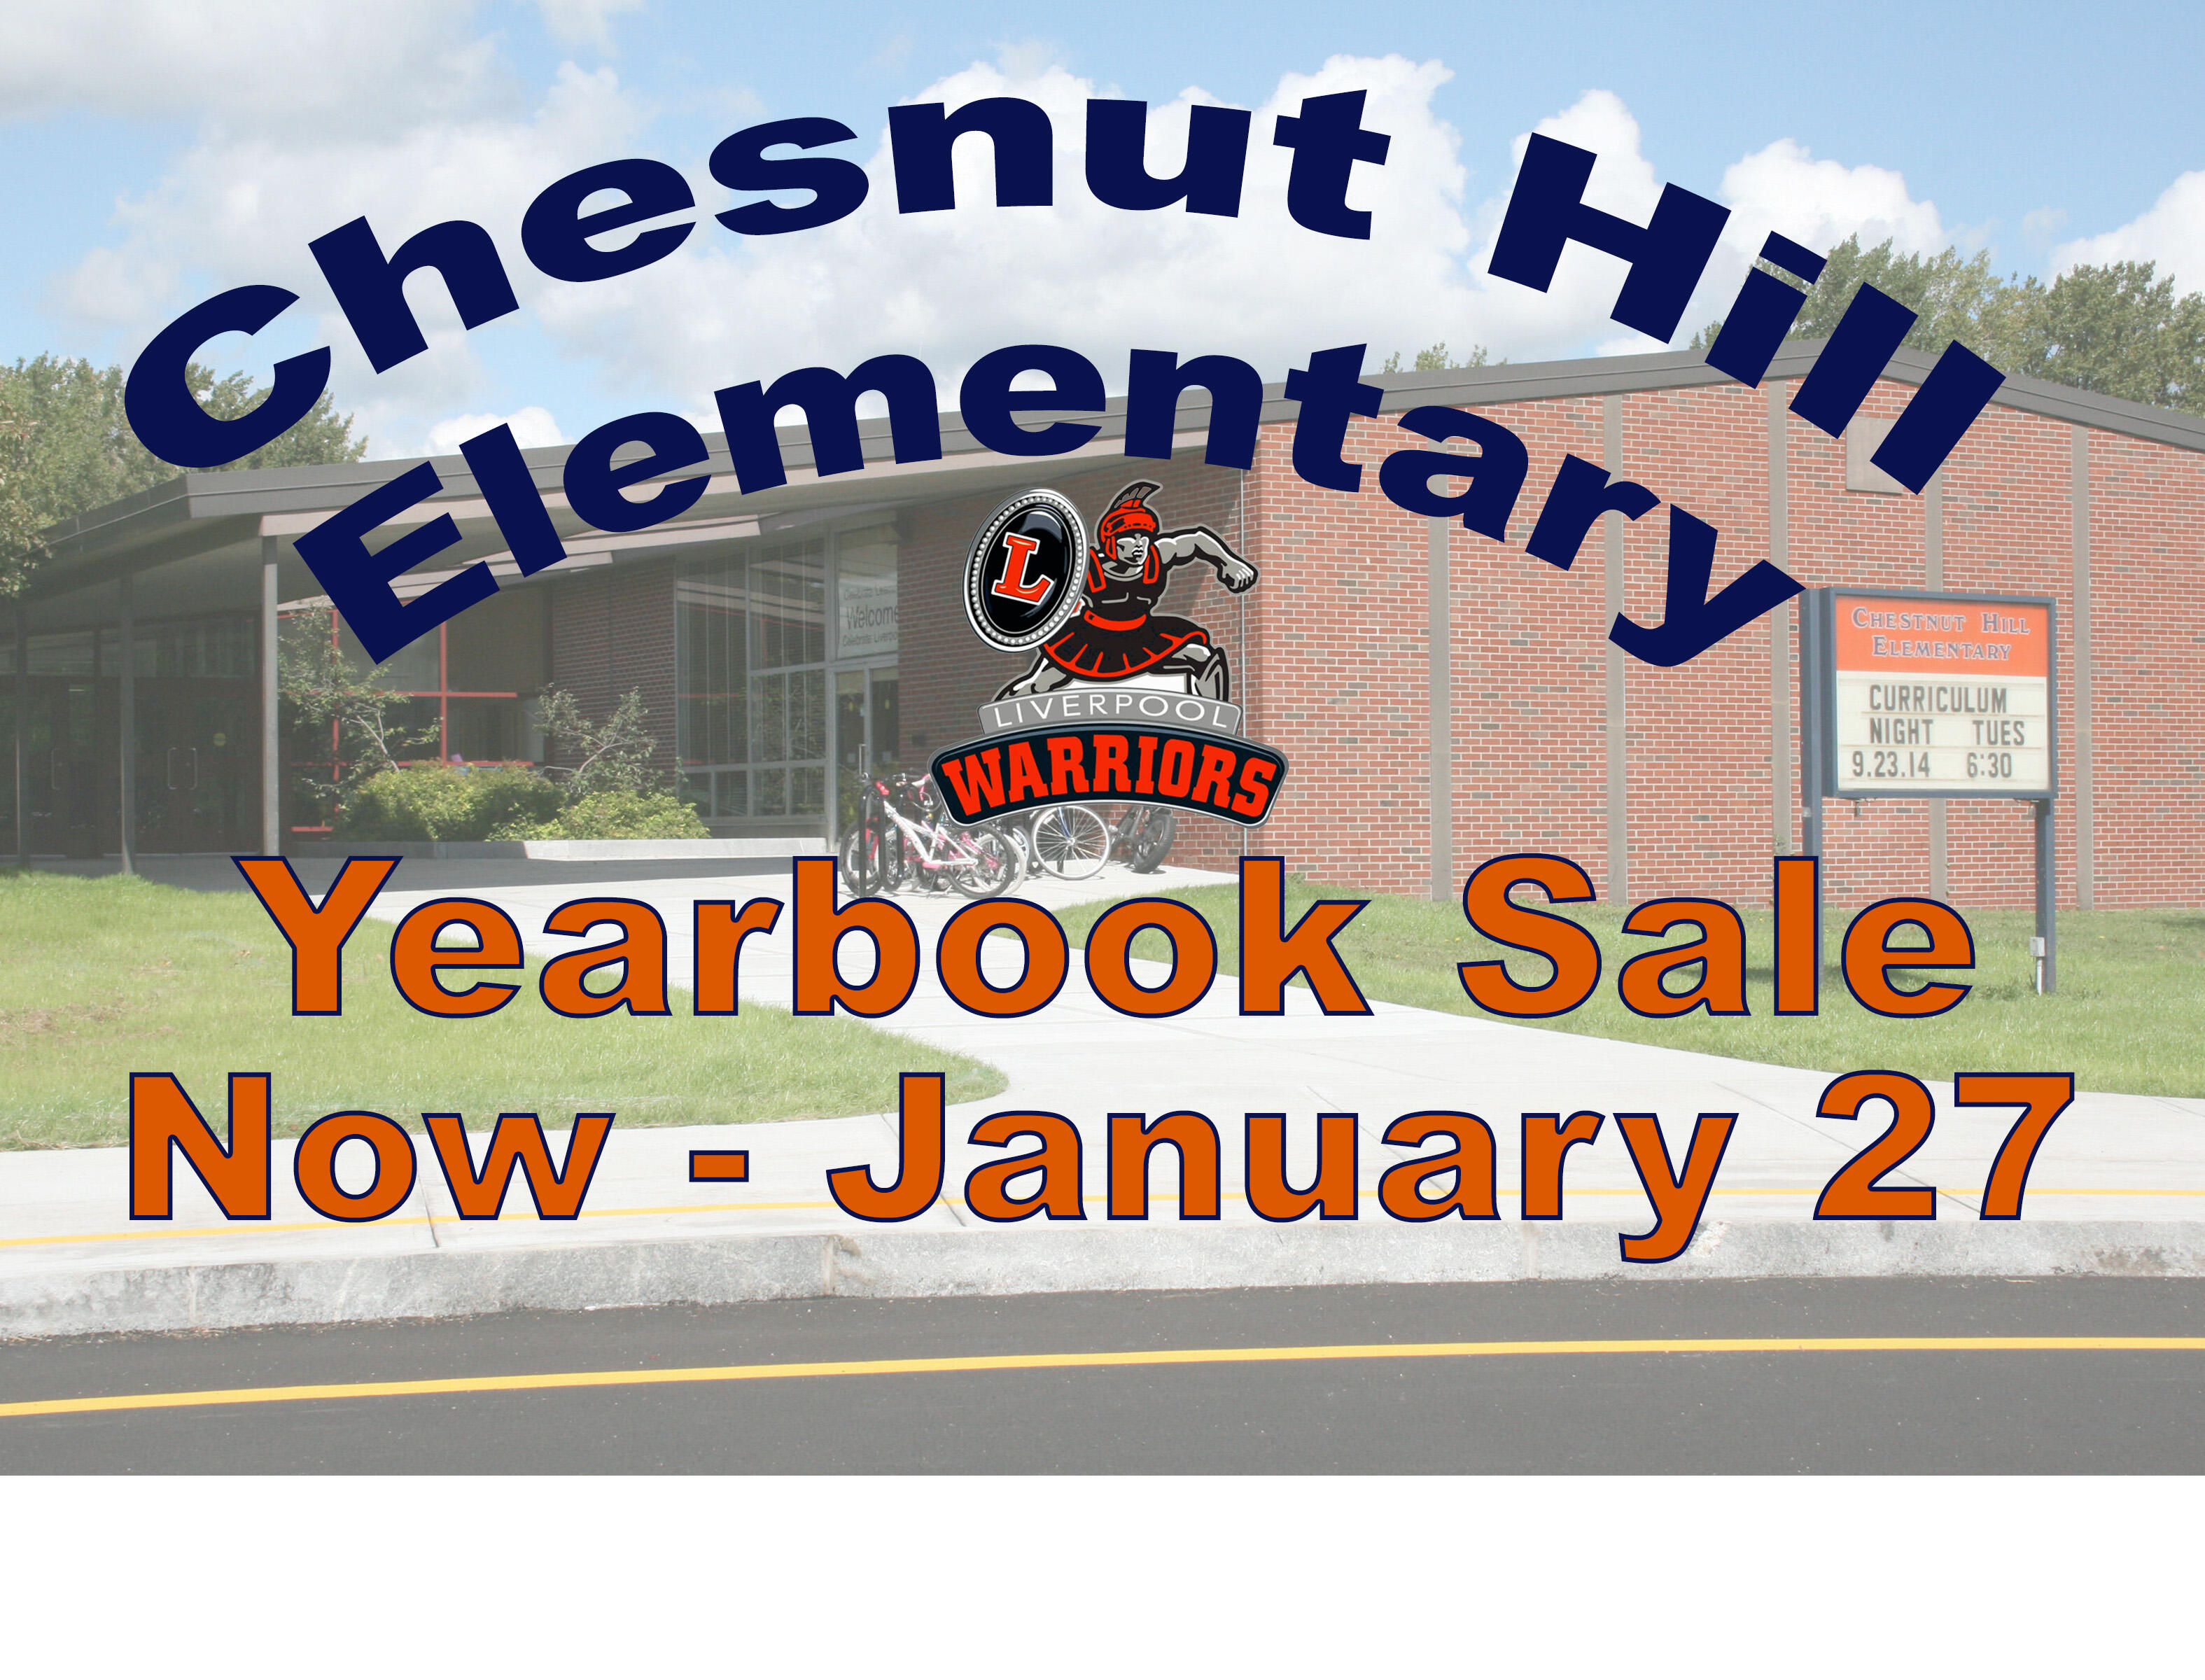 CHE Yearbook Sale Now - January 27 